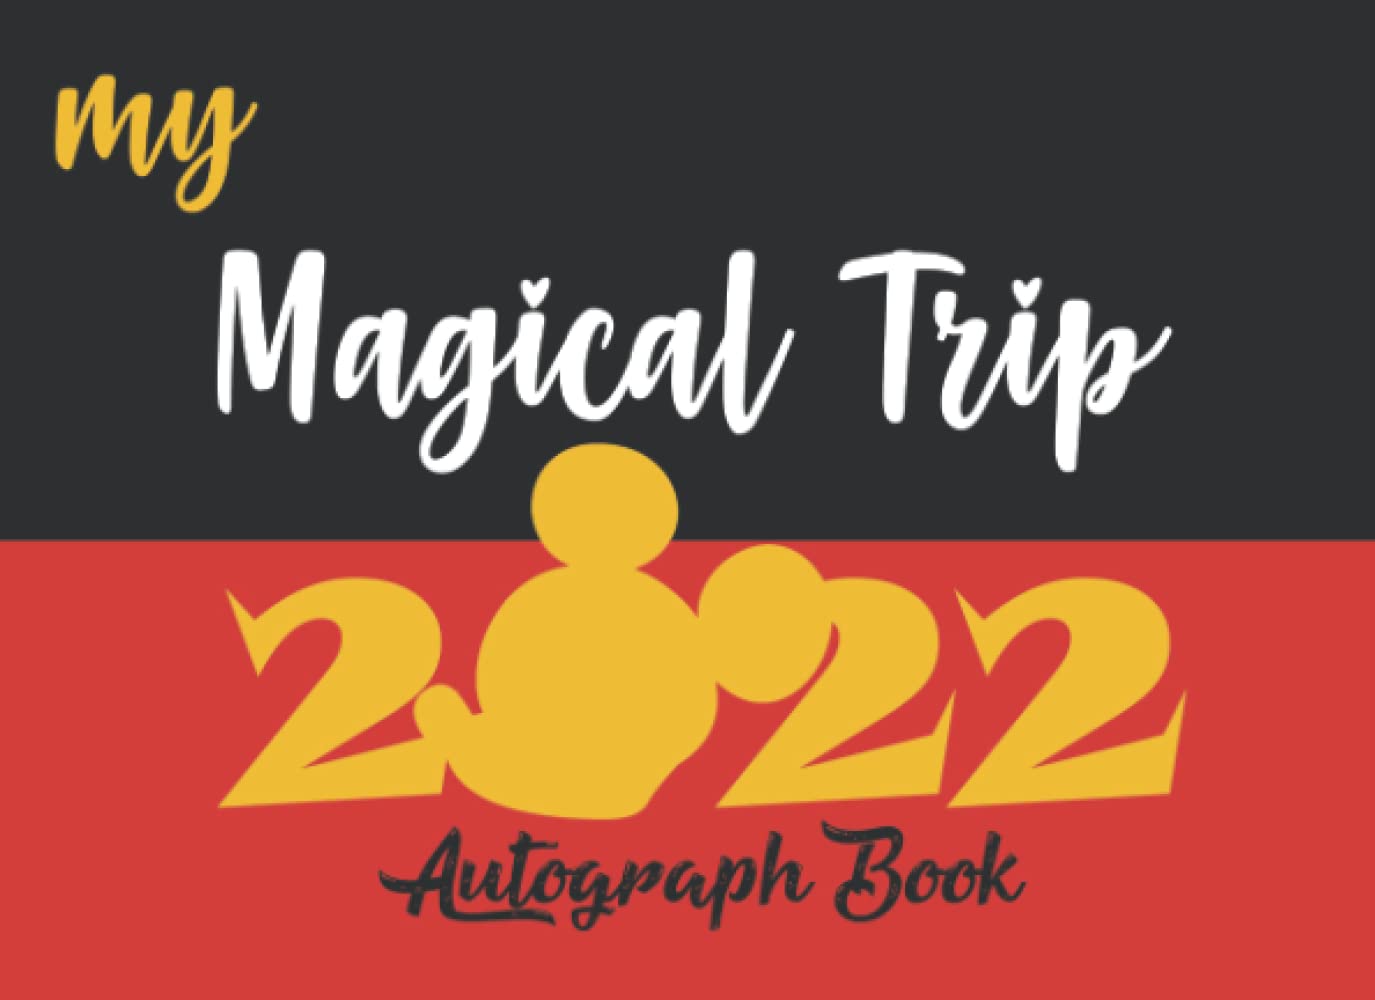 51r Q2k i6L - My Magical Trip Autograph Book: Autograph and Photo Book with a Double Page For Girls ,Celebrities Character Books Lovers.